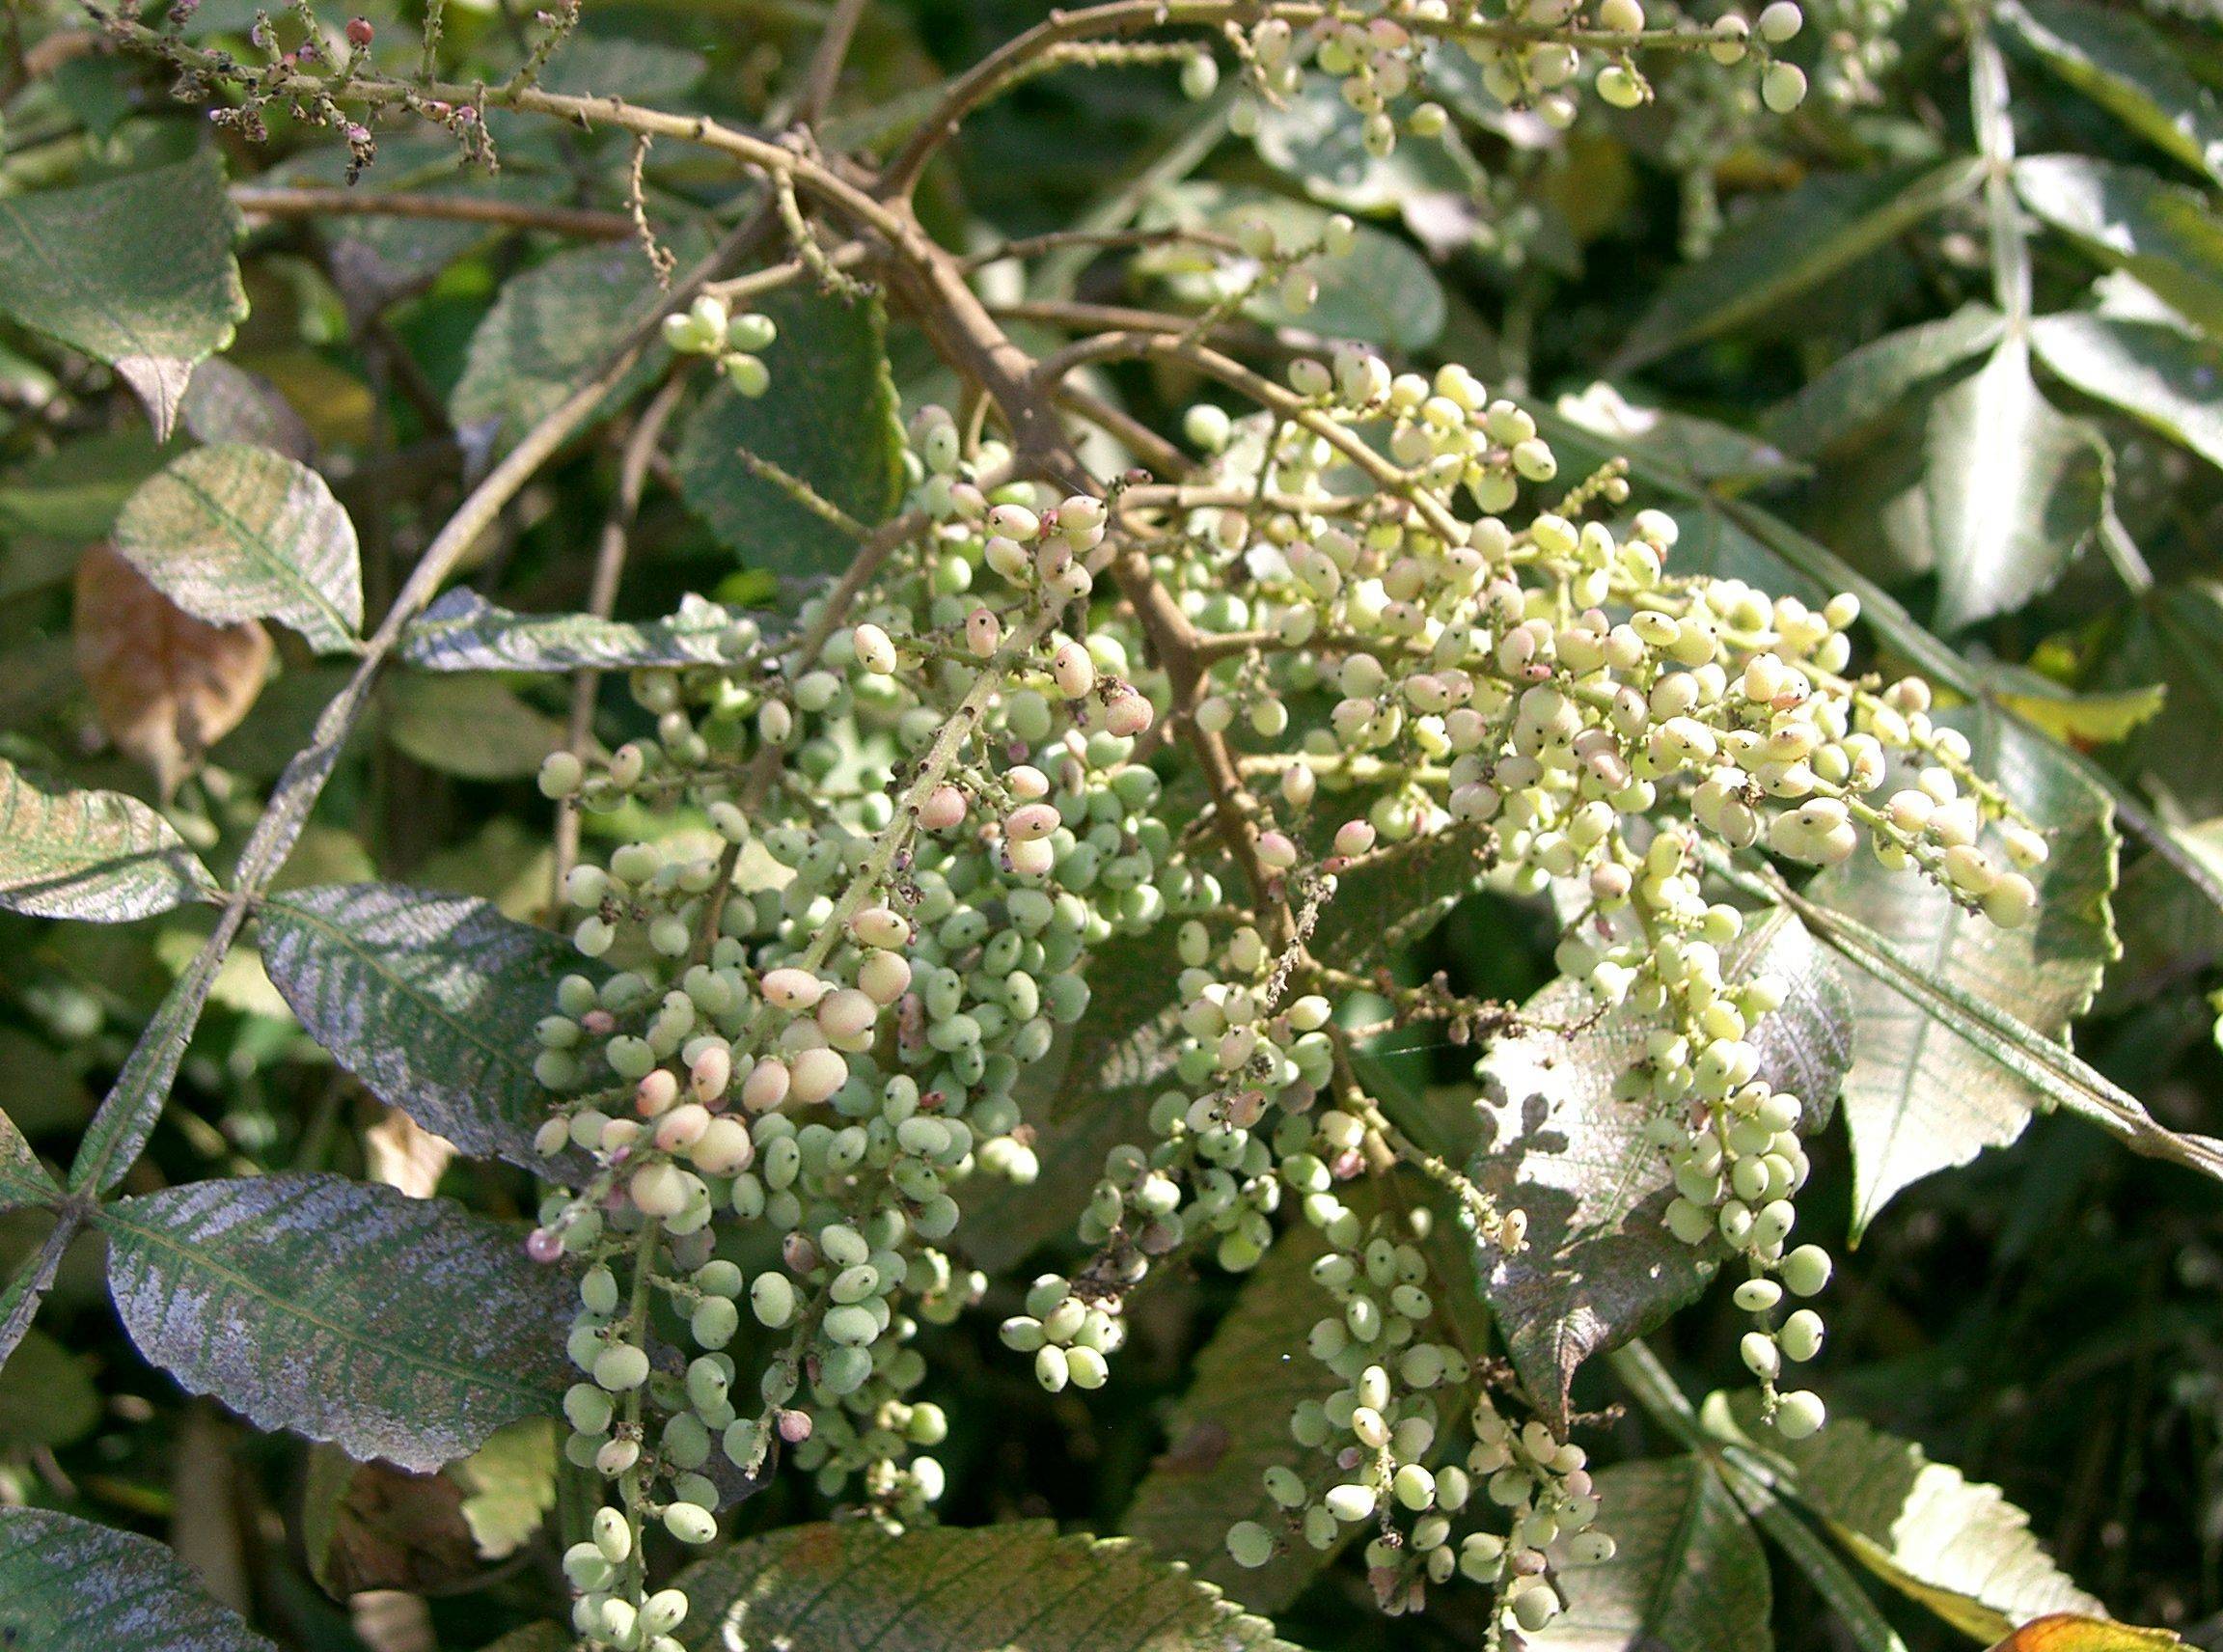 cream-green fruits with green leaves and brown branches